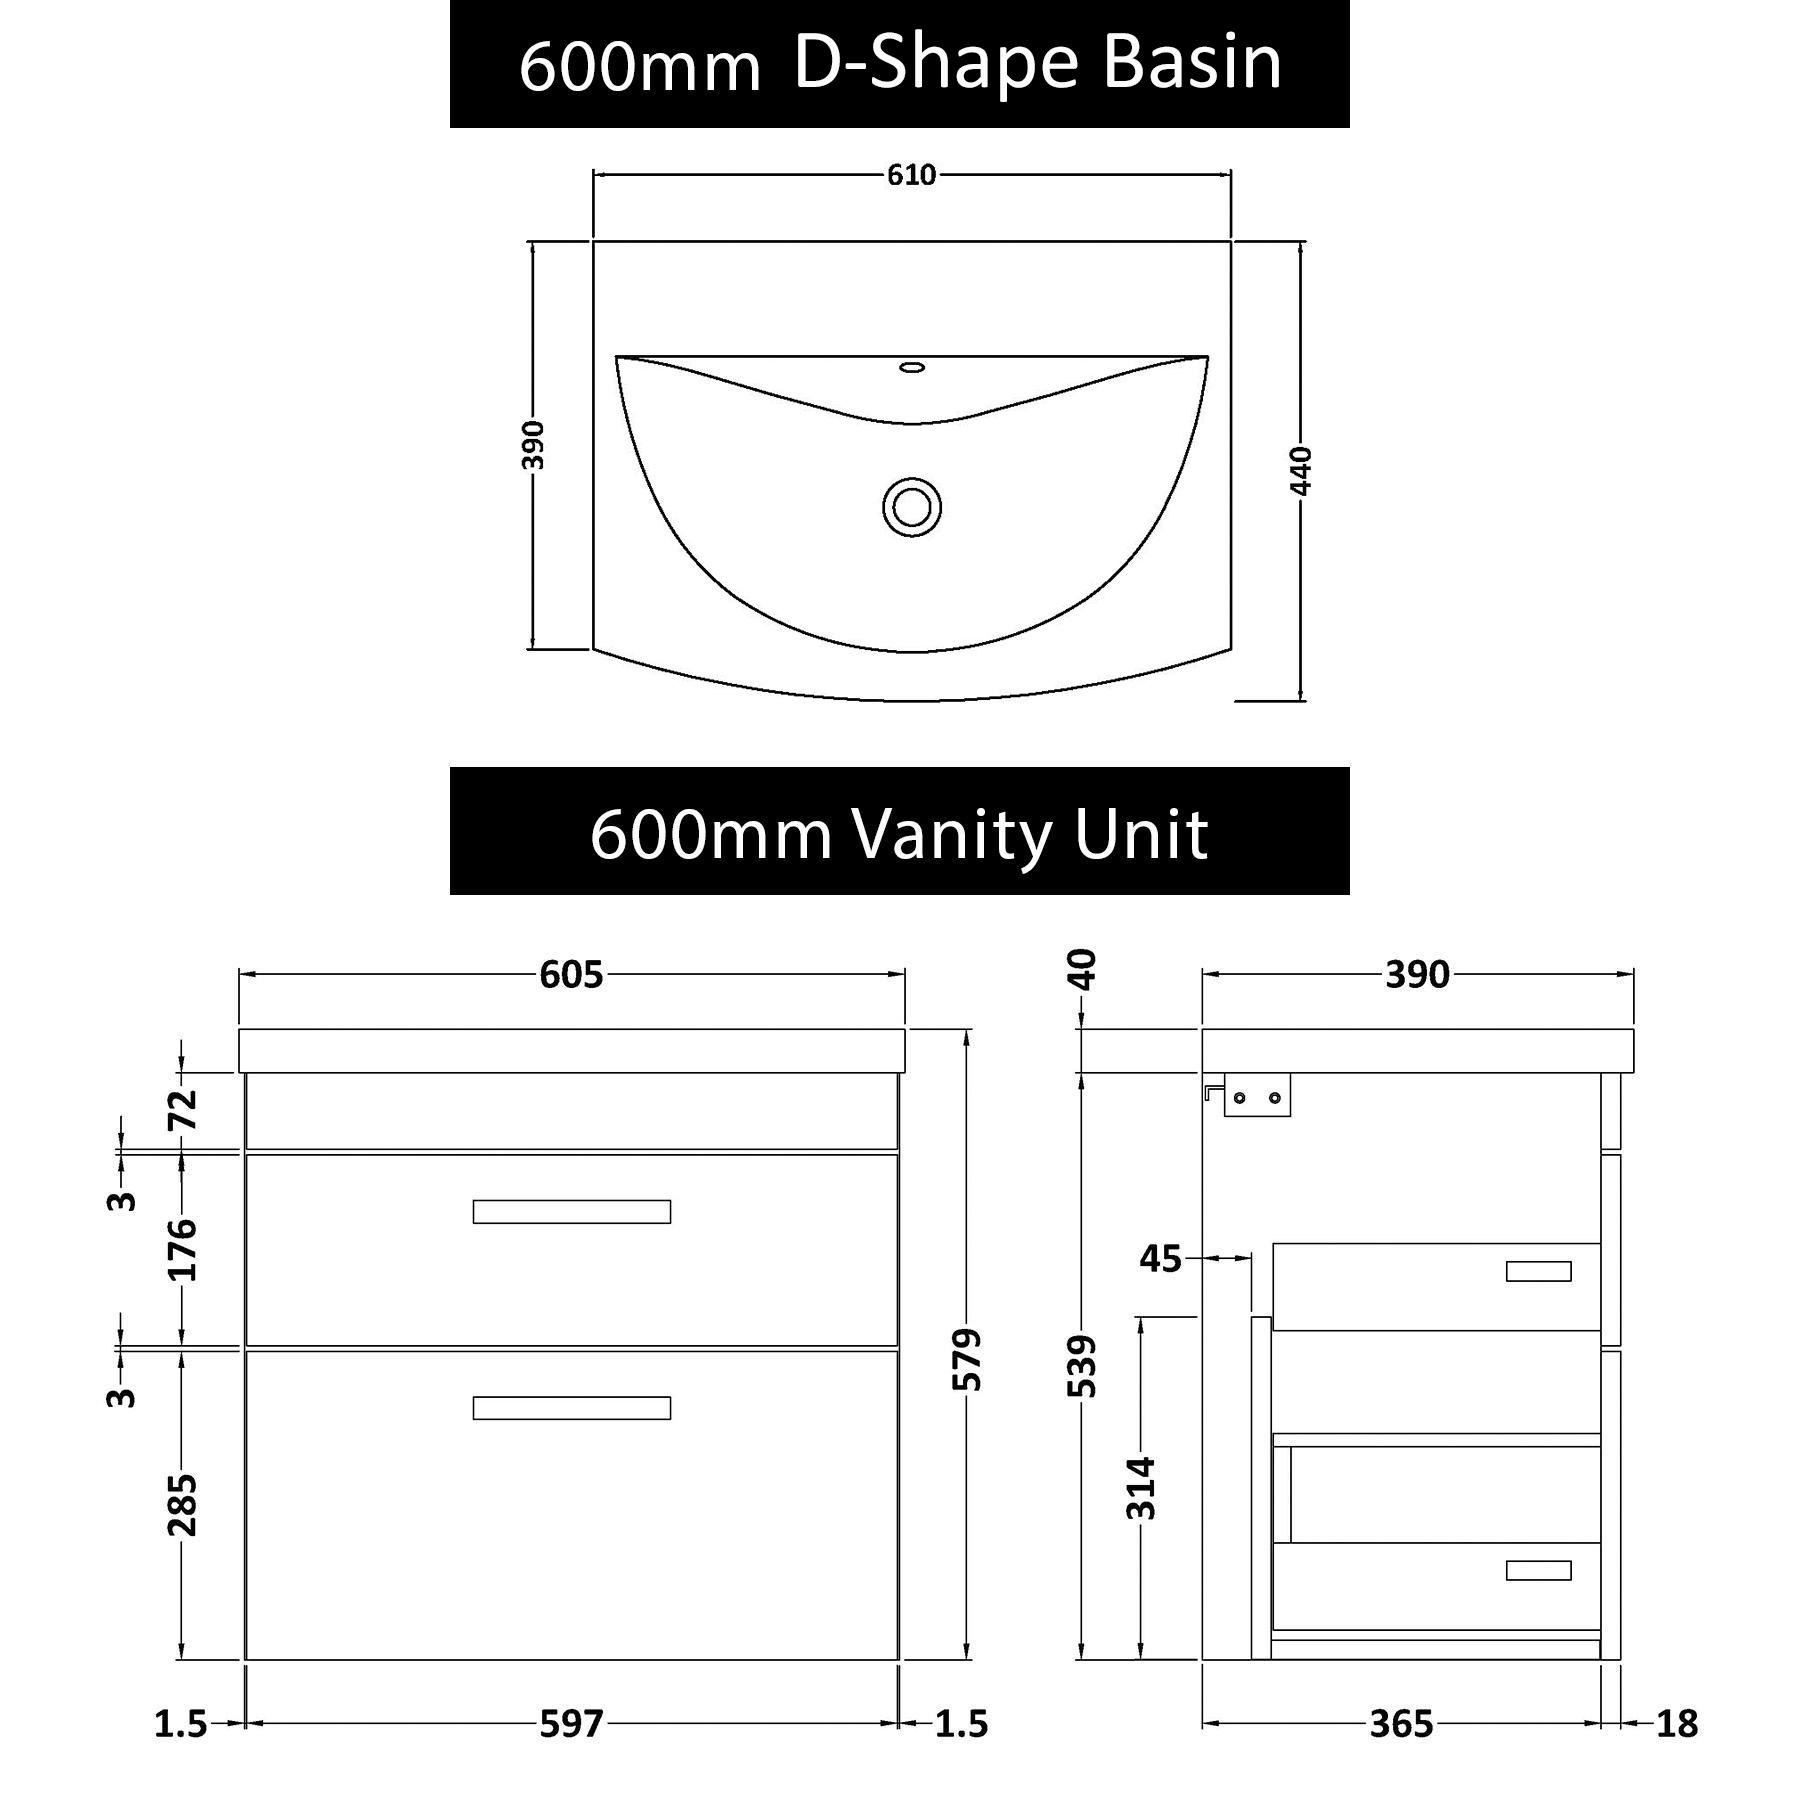  Marbella 500/600/800mm Hale Black 2 Drawer Wall Hung Vanity Unit Black Handle with Curved Basin